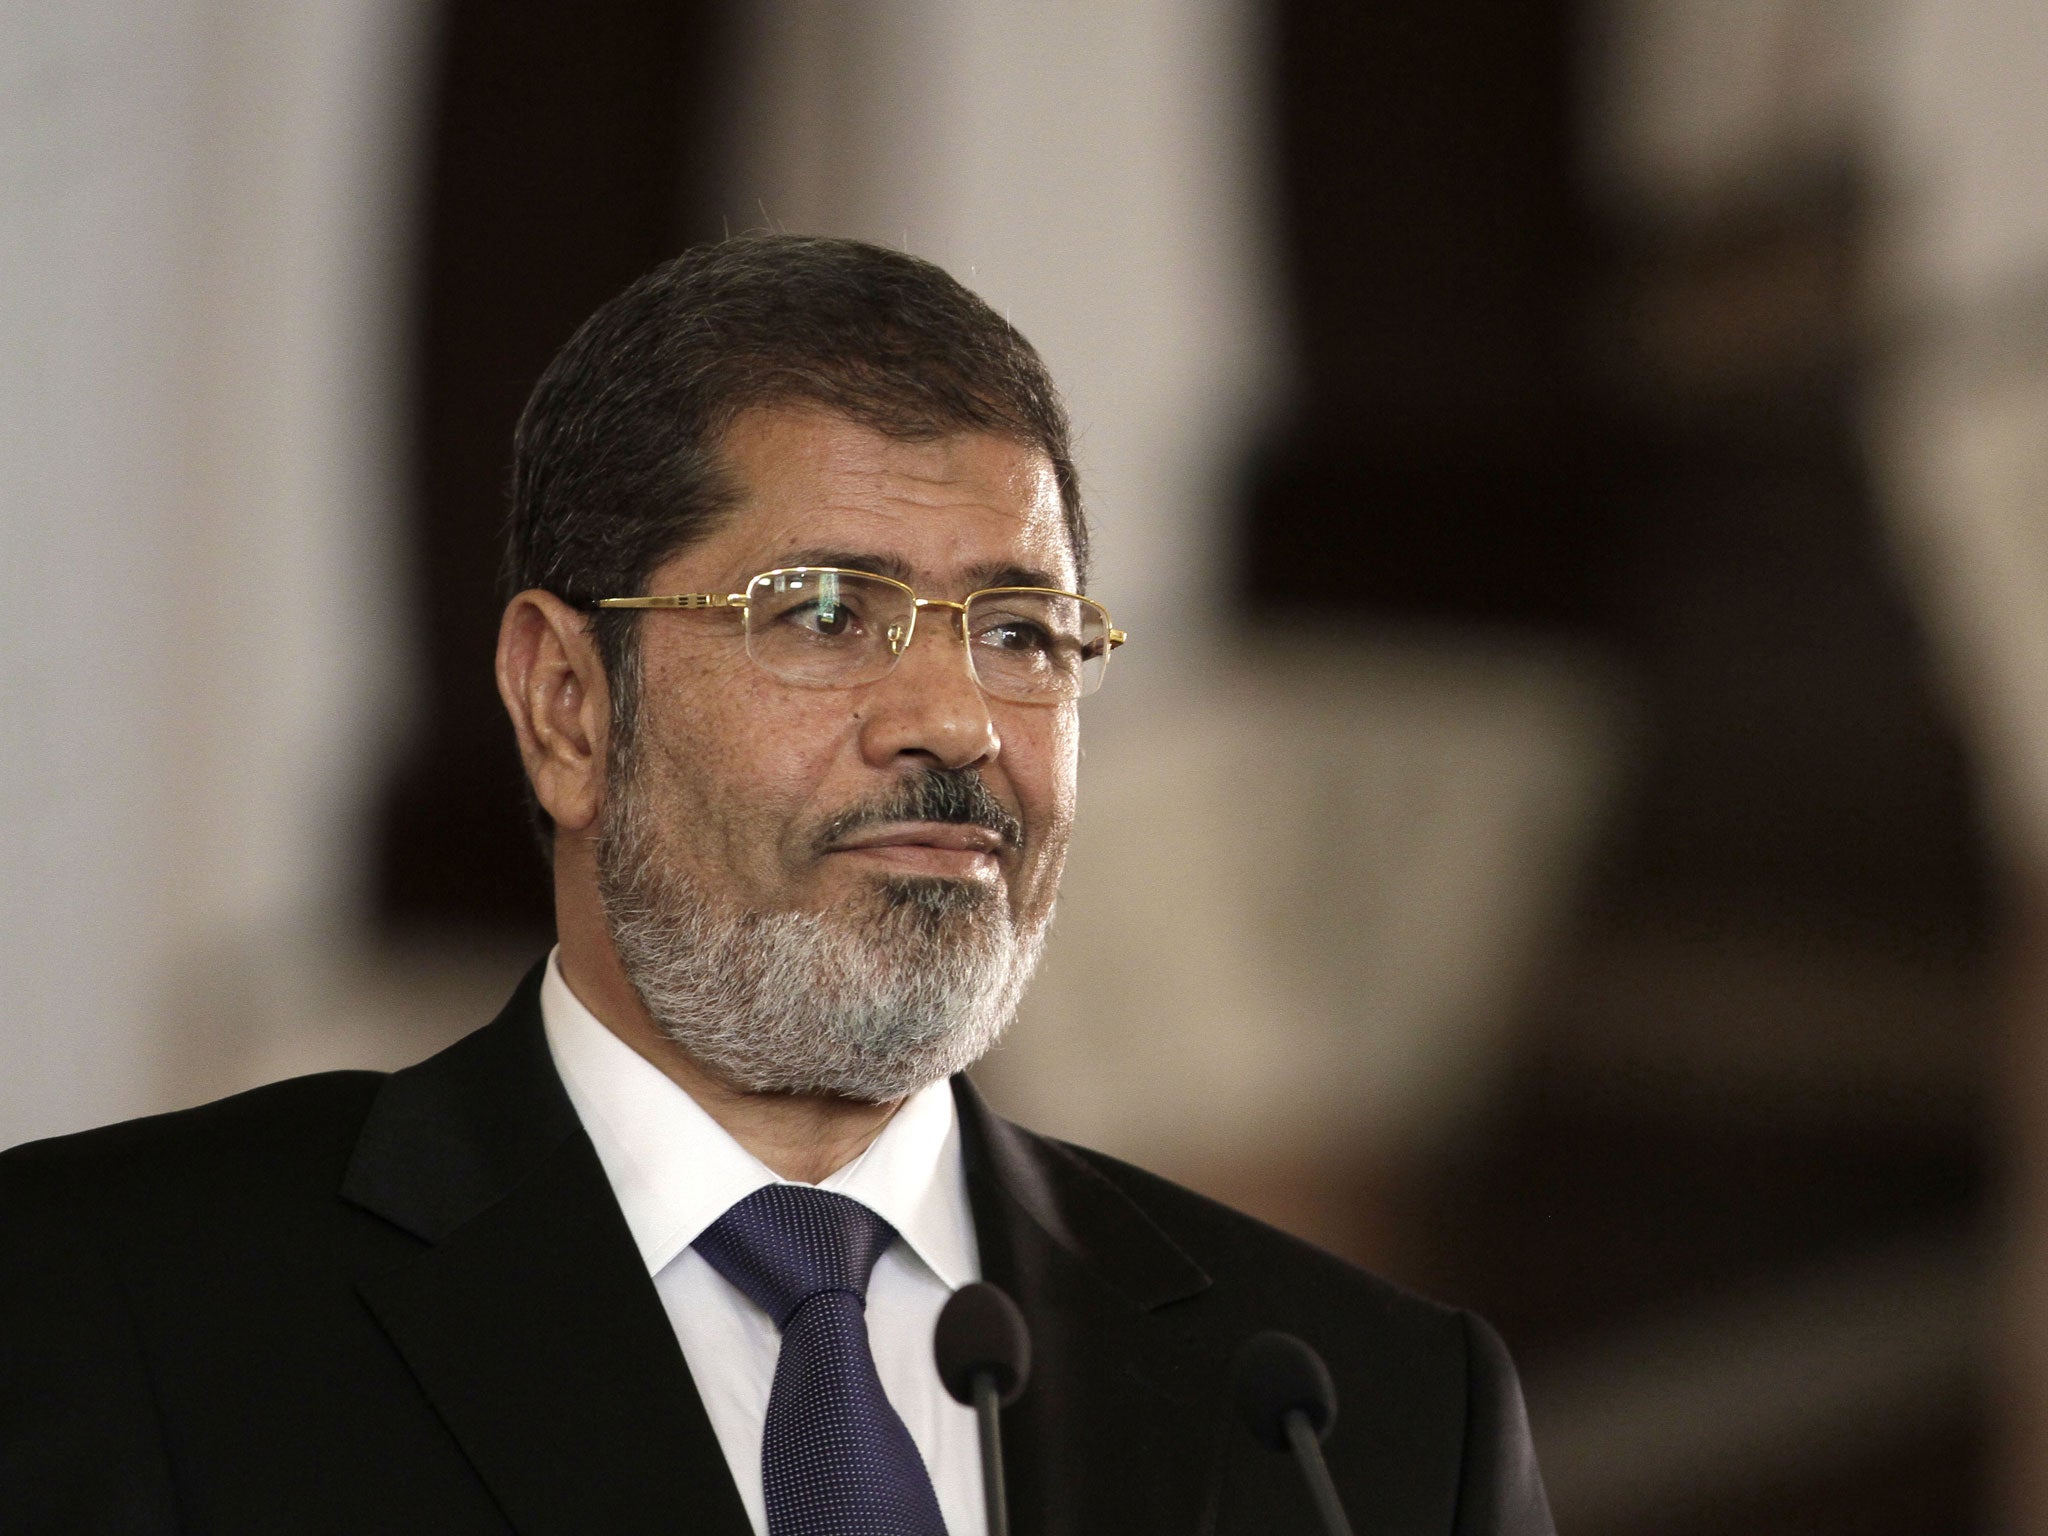 Desposed President Mohammed Morsi has been detained since July